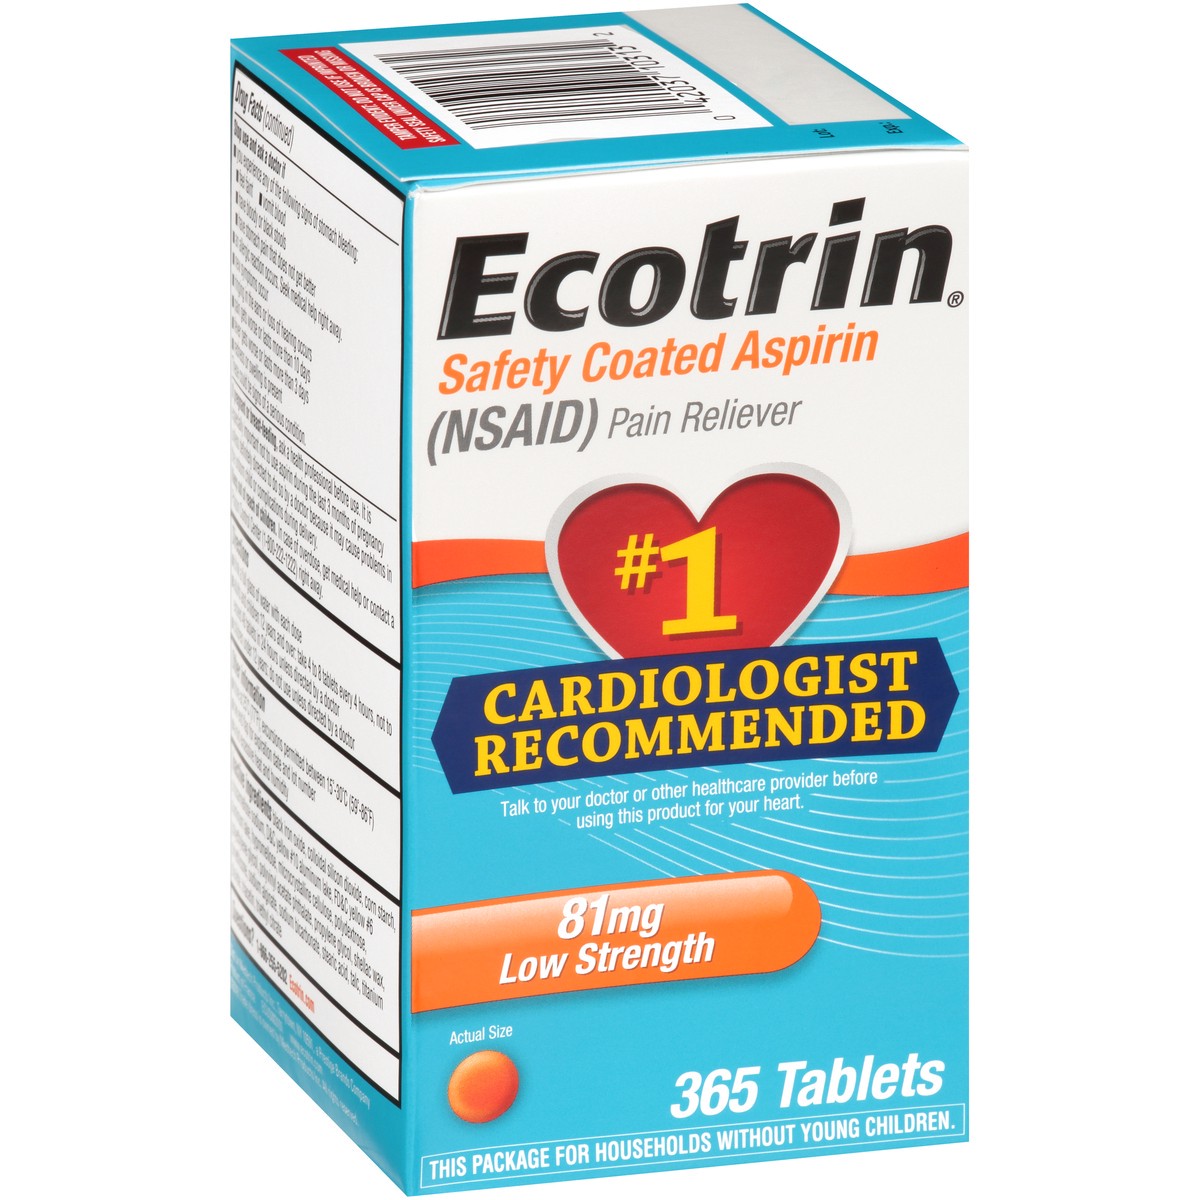 slide 8 of 10, Ecotrin Low Strength Safety Coated Aspirin, NSAID, 81mg, 365 Tablets, 365 pk